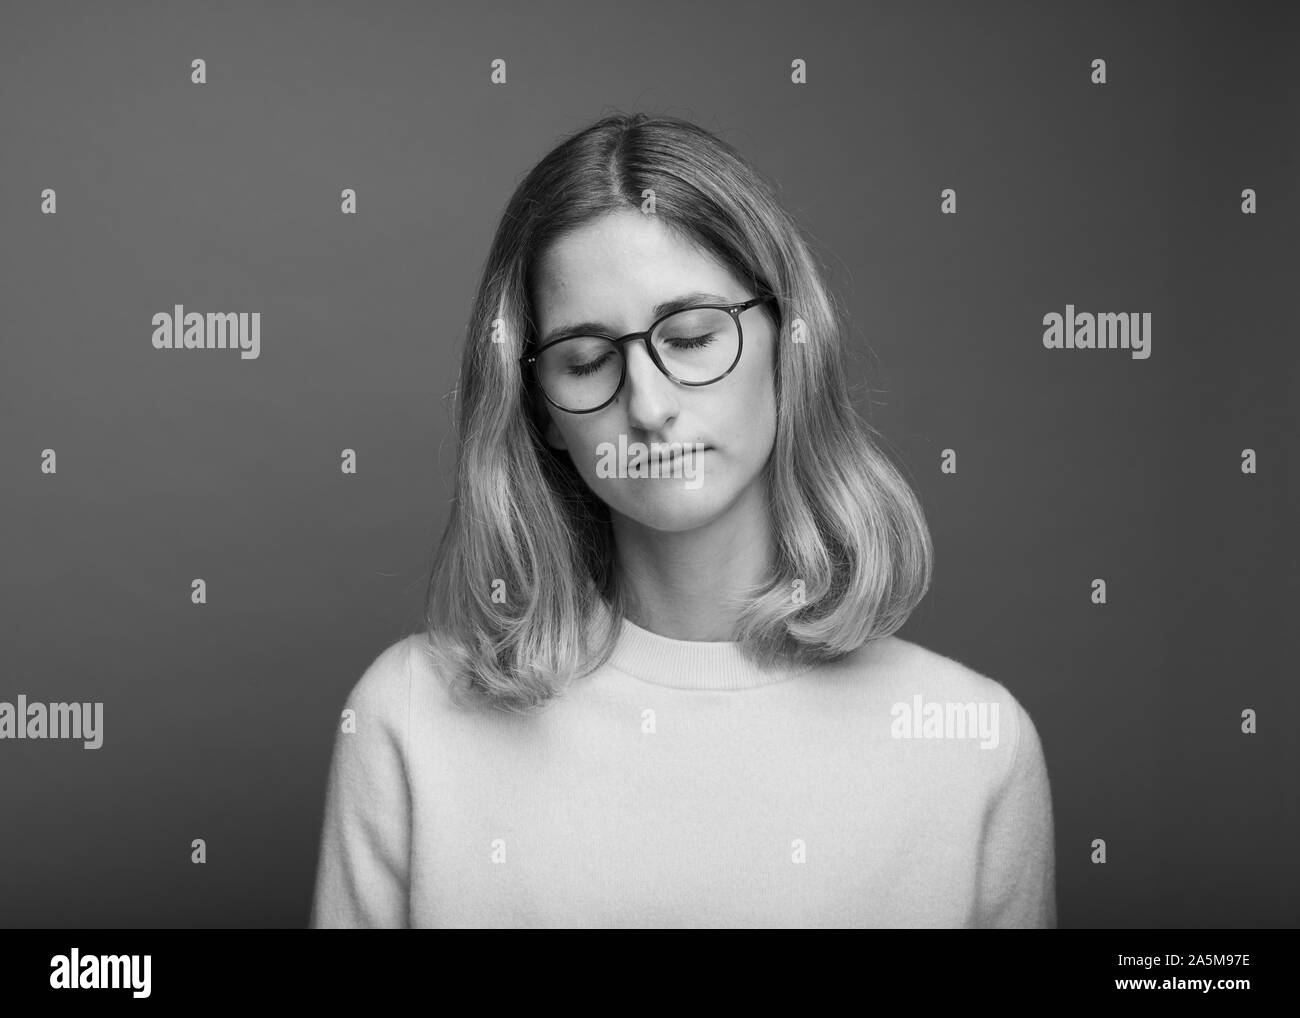 black and white studio shot of woman wearing glasses and having her eyes closed Stock Photo